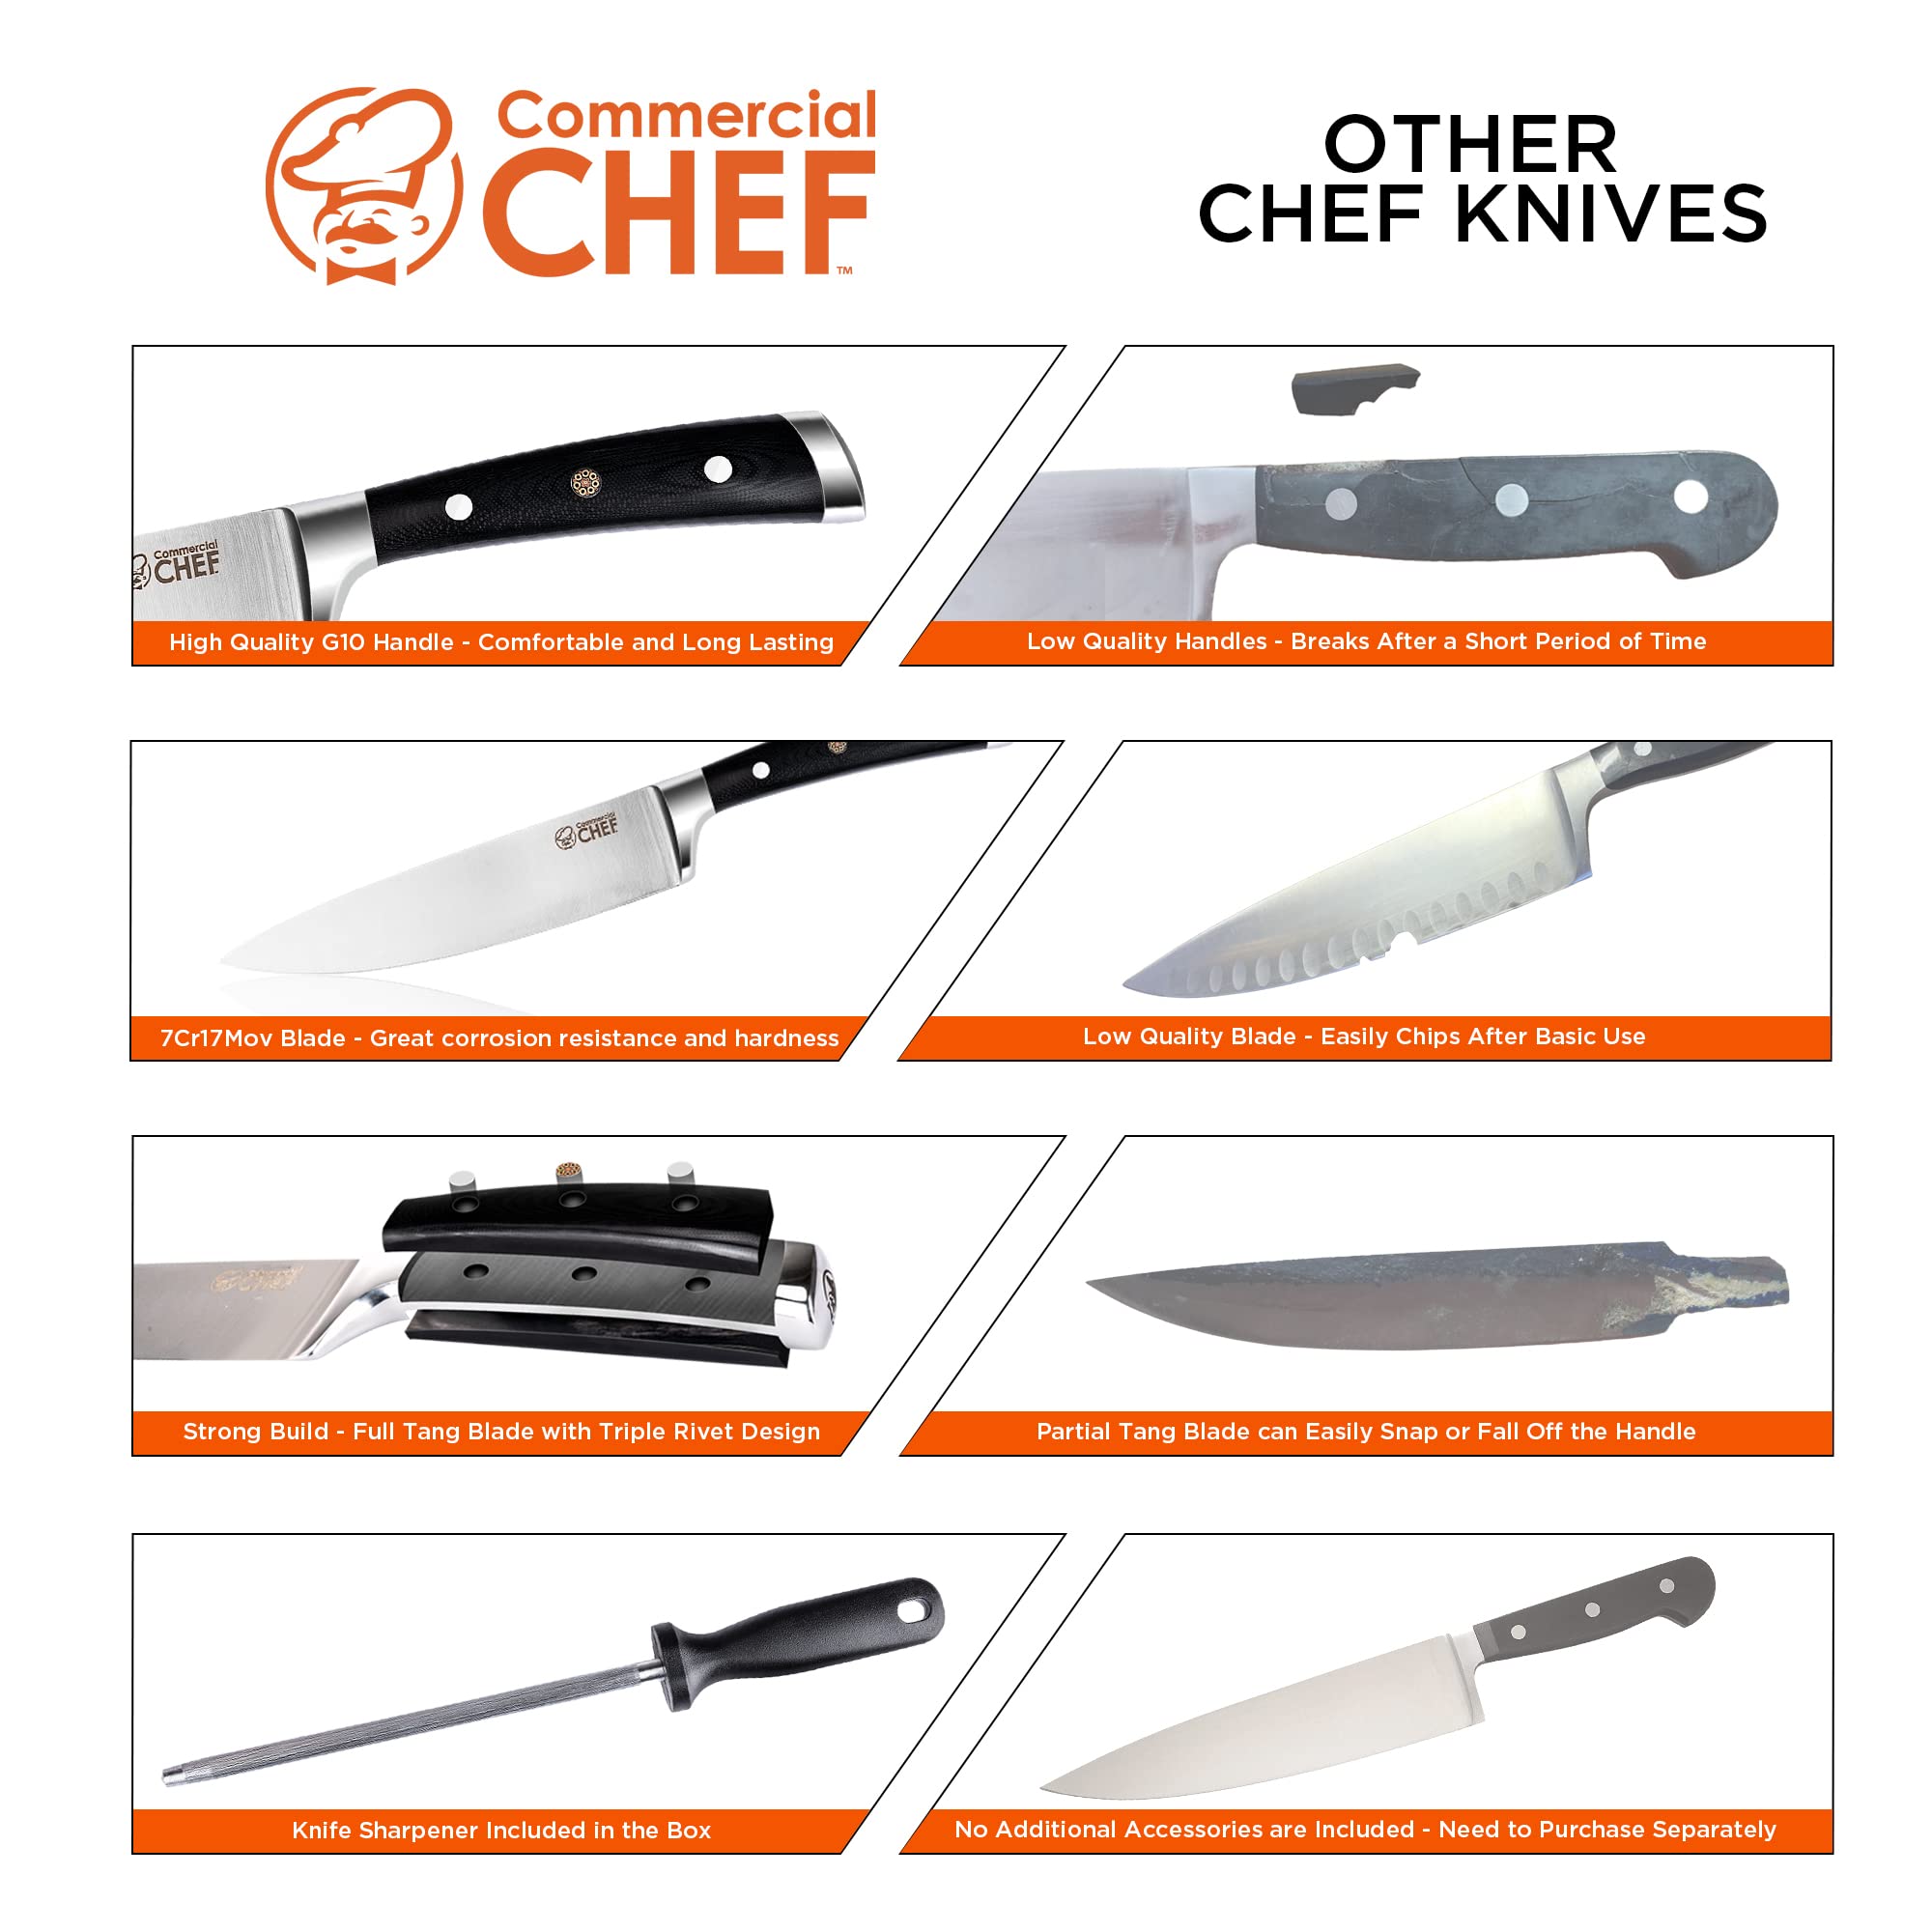 Commercial CHEF Professional Chef Knife with Sharpener - 8 Inch Chef's Knives - Well Balanced Full Tang Ultra Sharp Kitchen Knife - High Carbon Stainless Steel - Long Lasting Cooking Knife - Gift Box